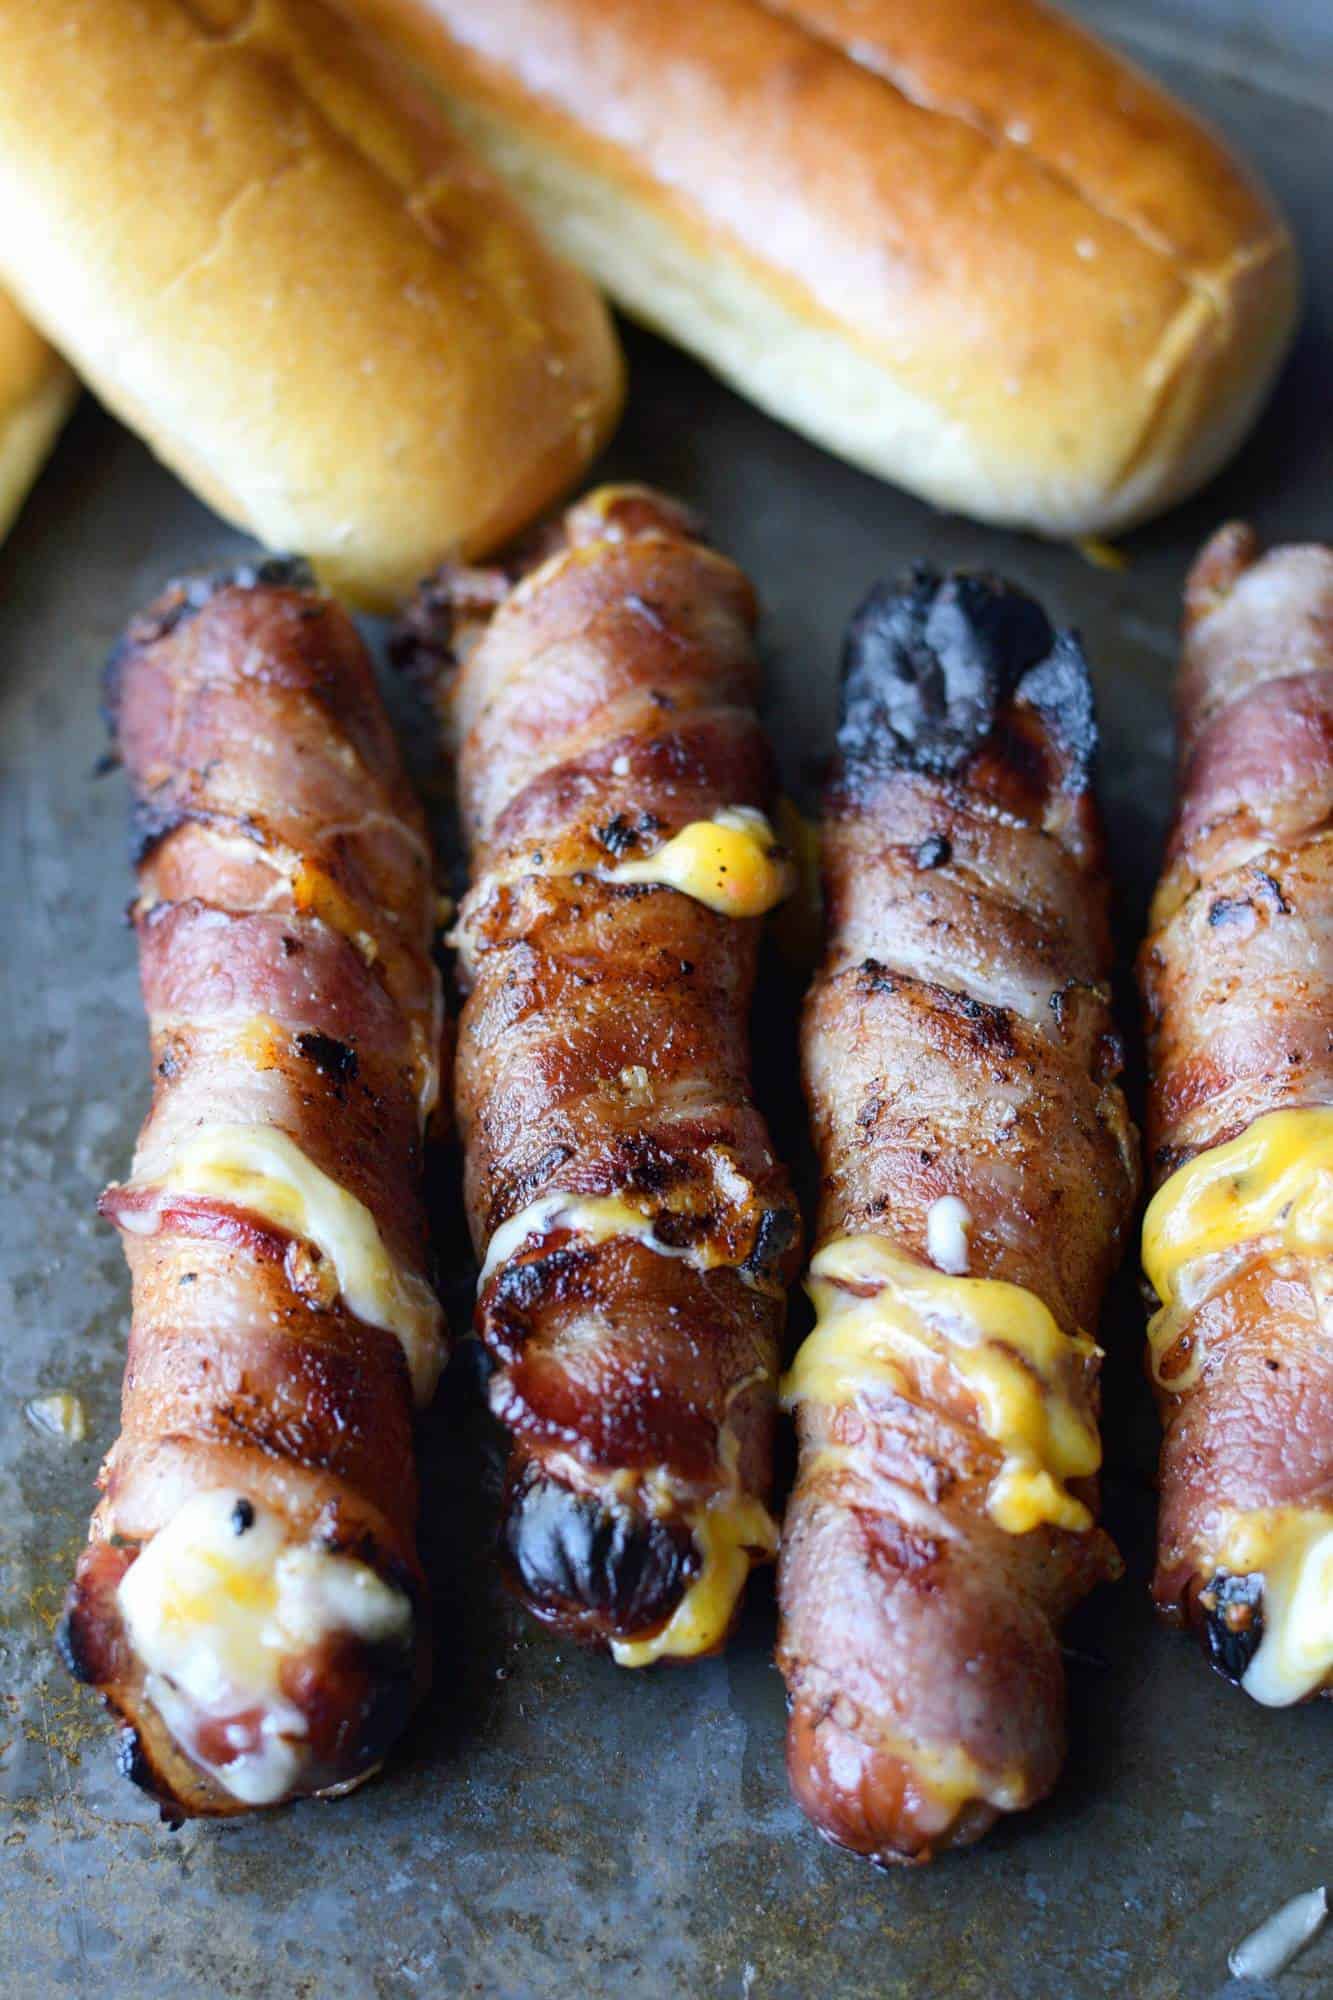 Bacon wrapped cheese stuffed hot dogs